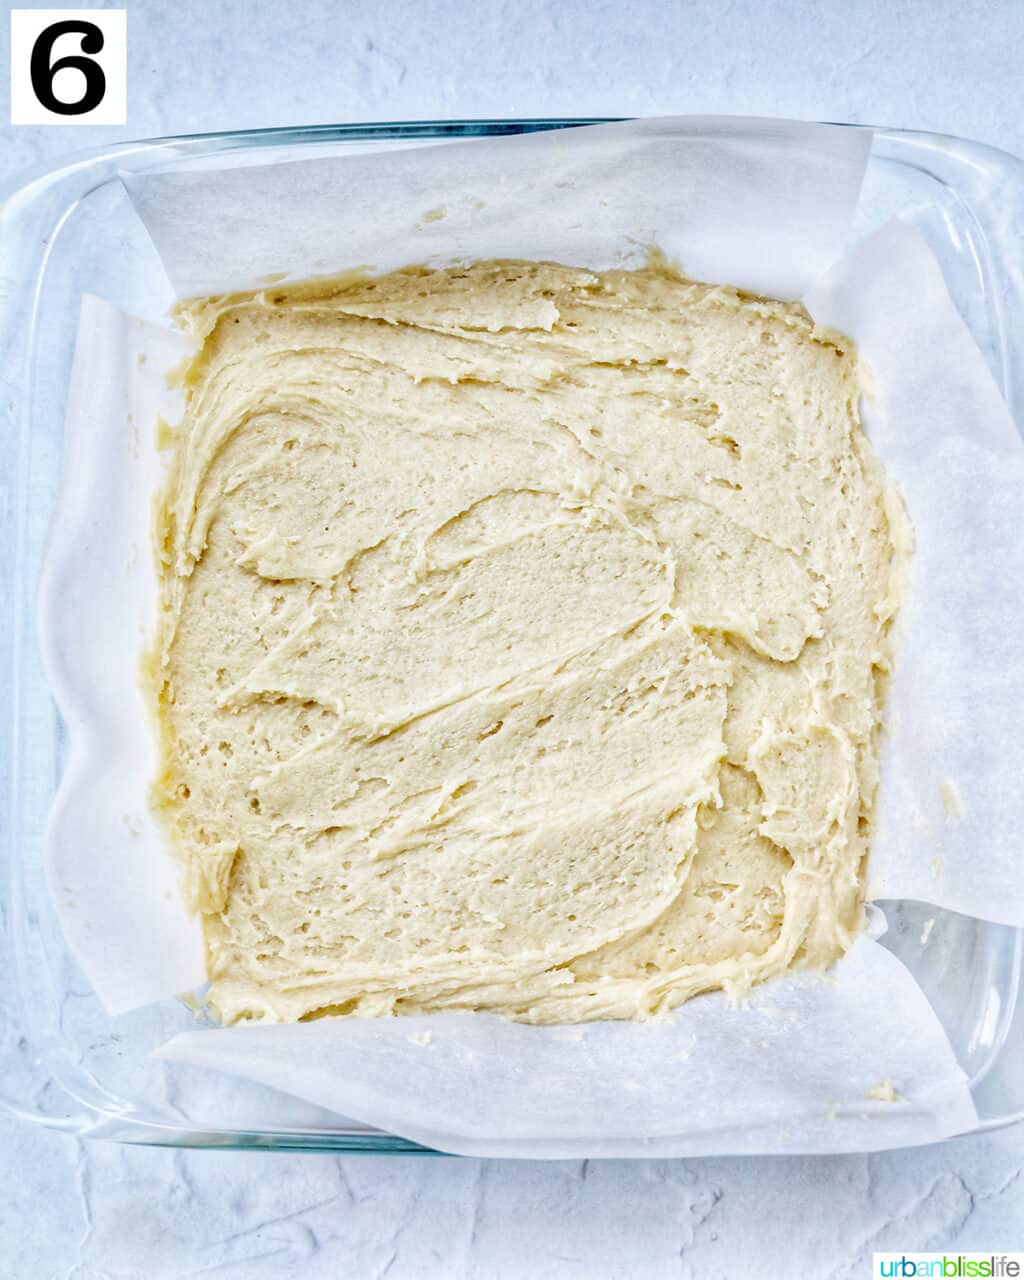 Thick cake batter in a glass baking dish lined with parchment paper.